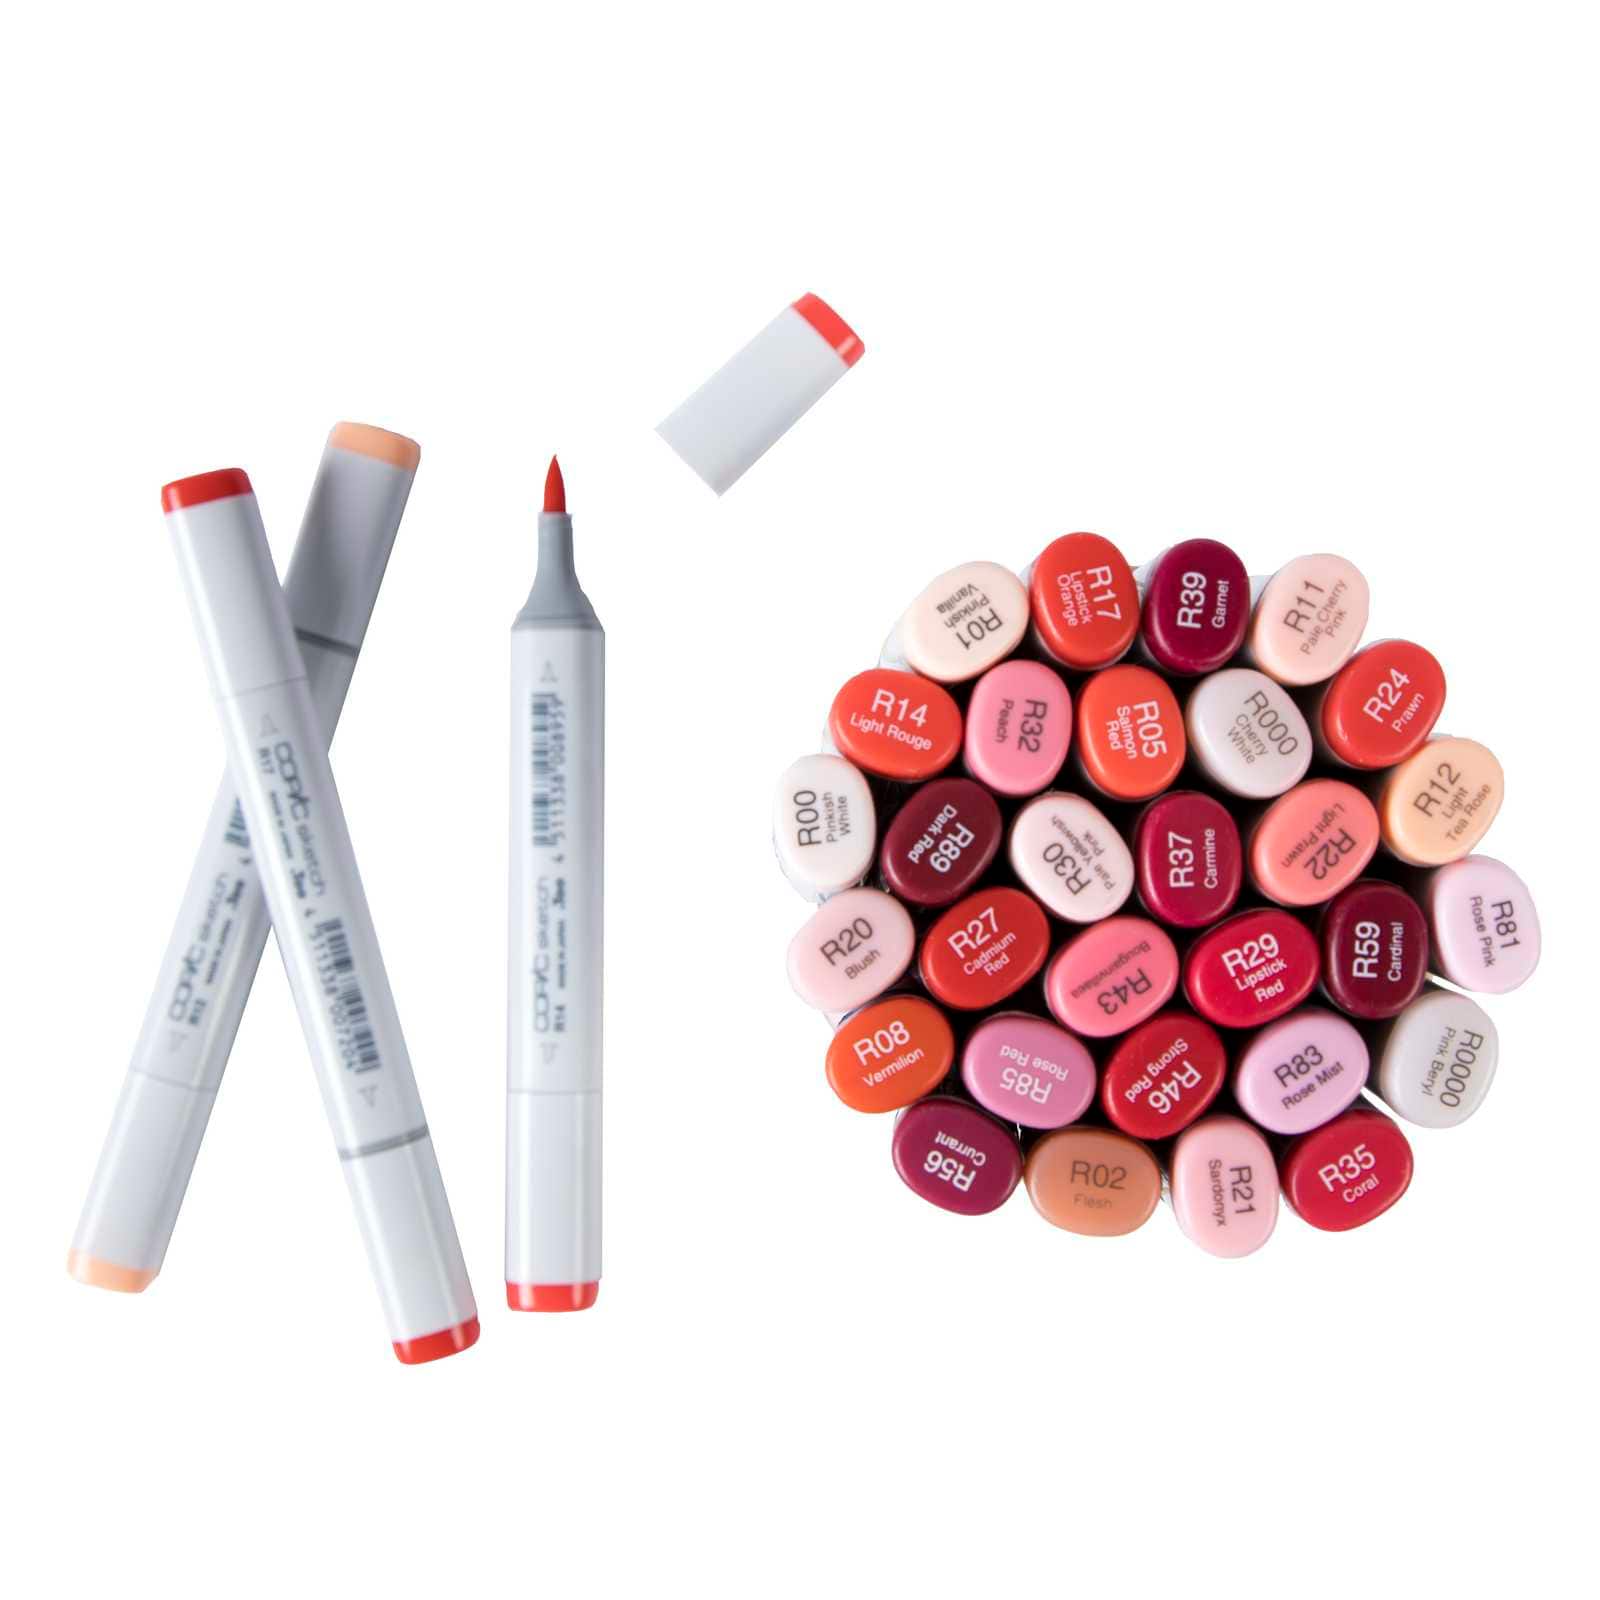 Copic Marker S R85-Various Sketch Rose Red